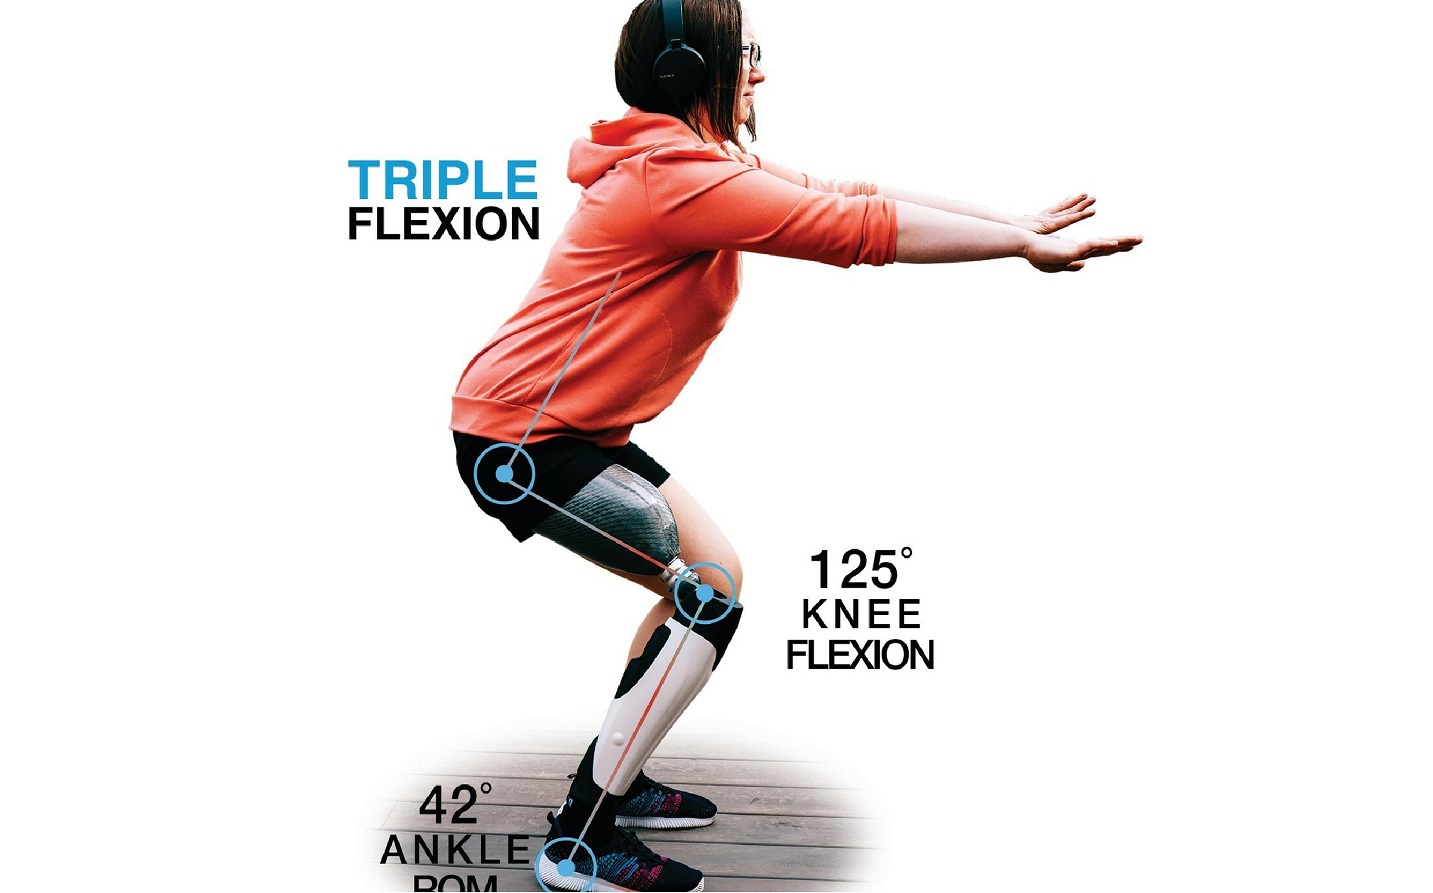 Proteor launches SYNSYS full-leg system for triple flexion